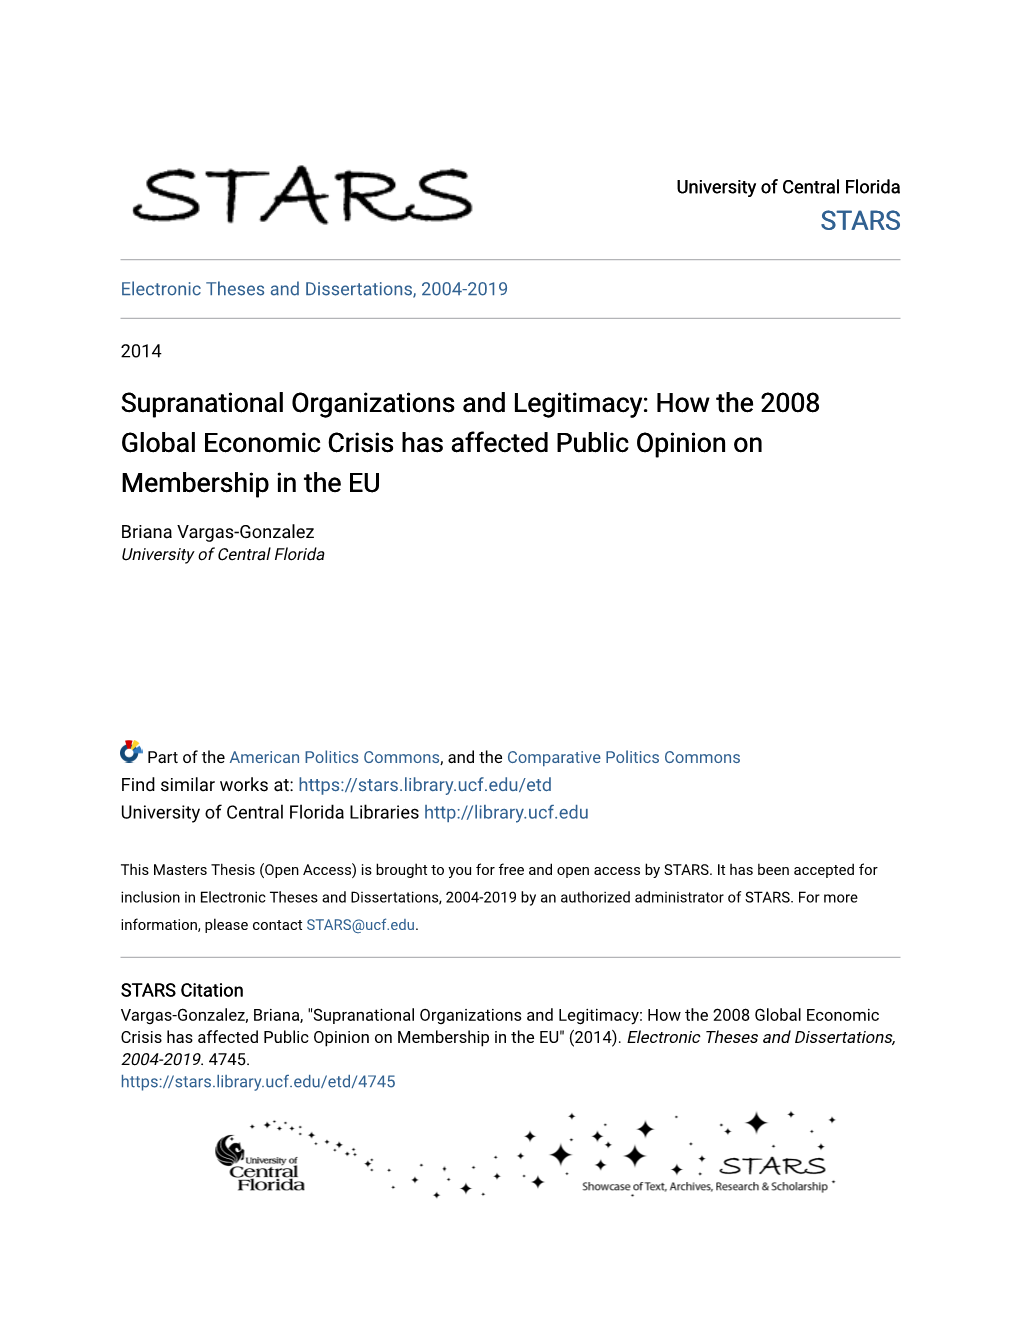 Supranational Organizations and Legitimacy: How the 2008 Global Economic Crisis Has Affected Public Opinion on Membership in the EU